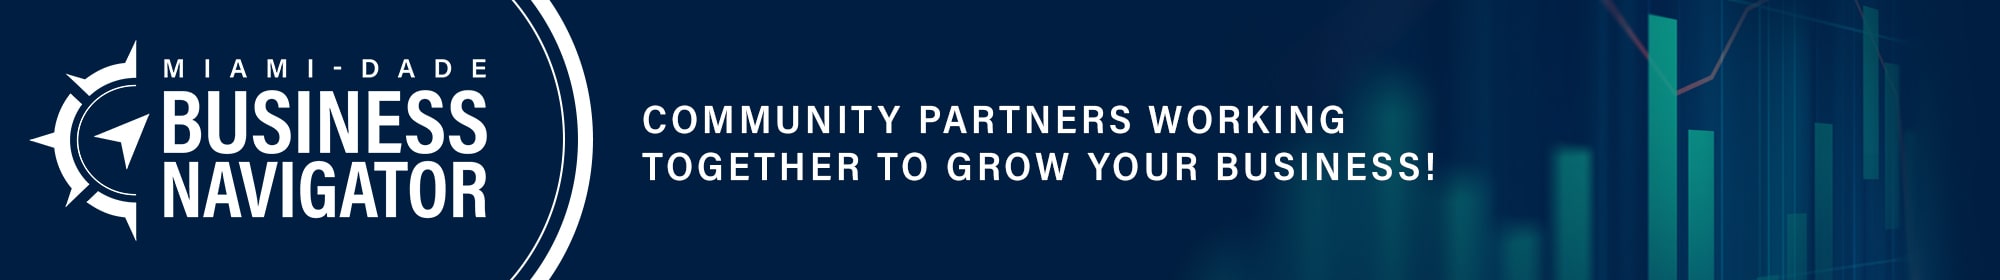 Miami-Dade Business Navigator, Community partners working together to grow your business